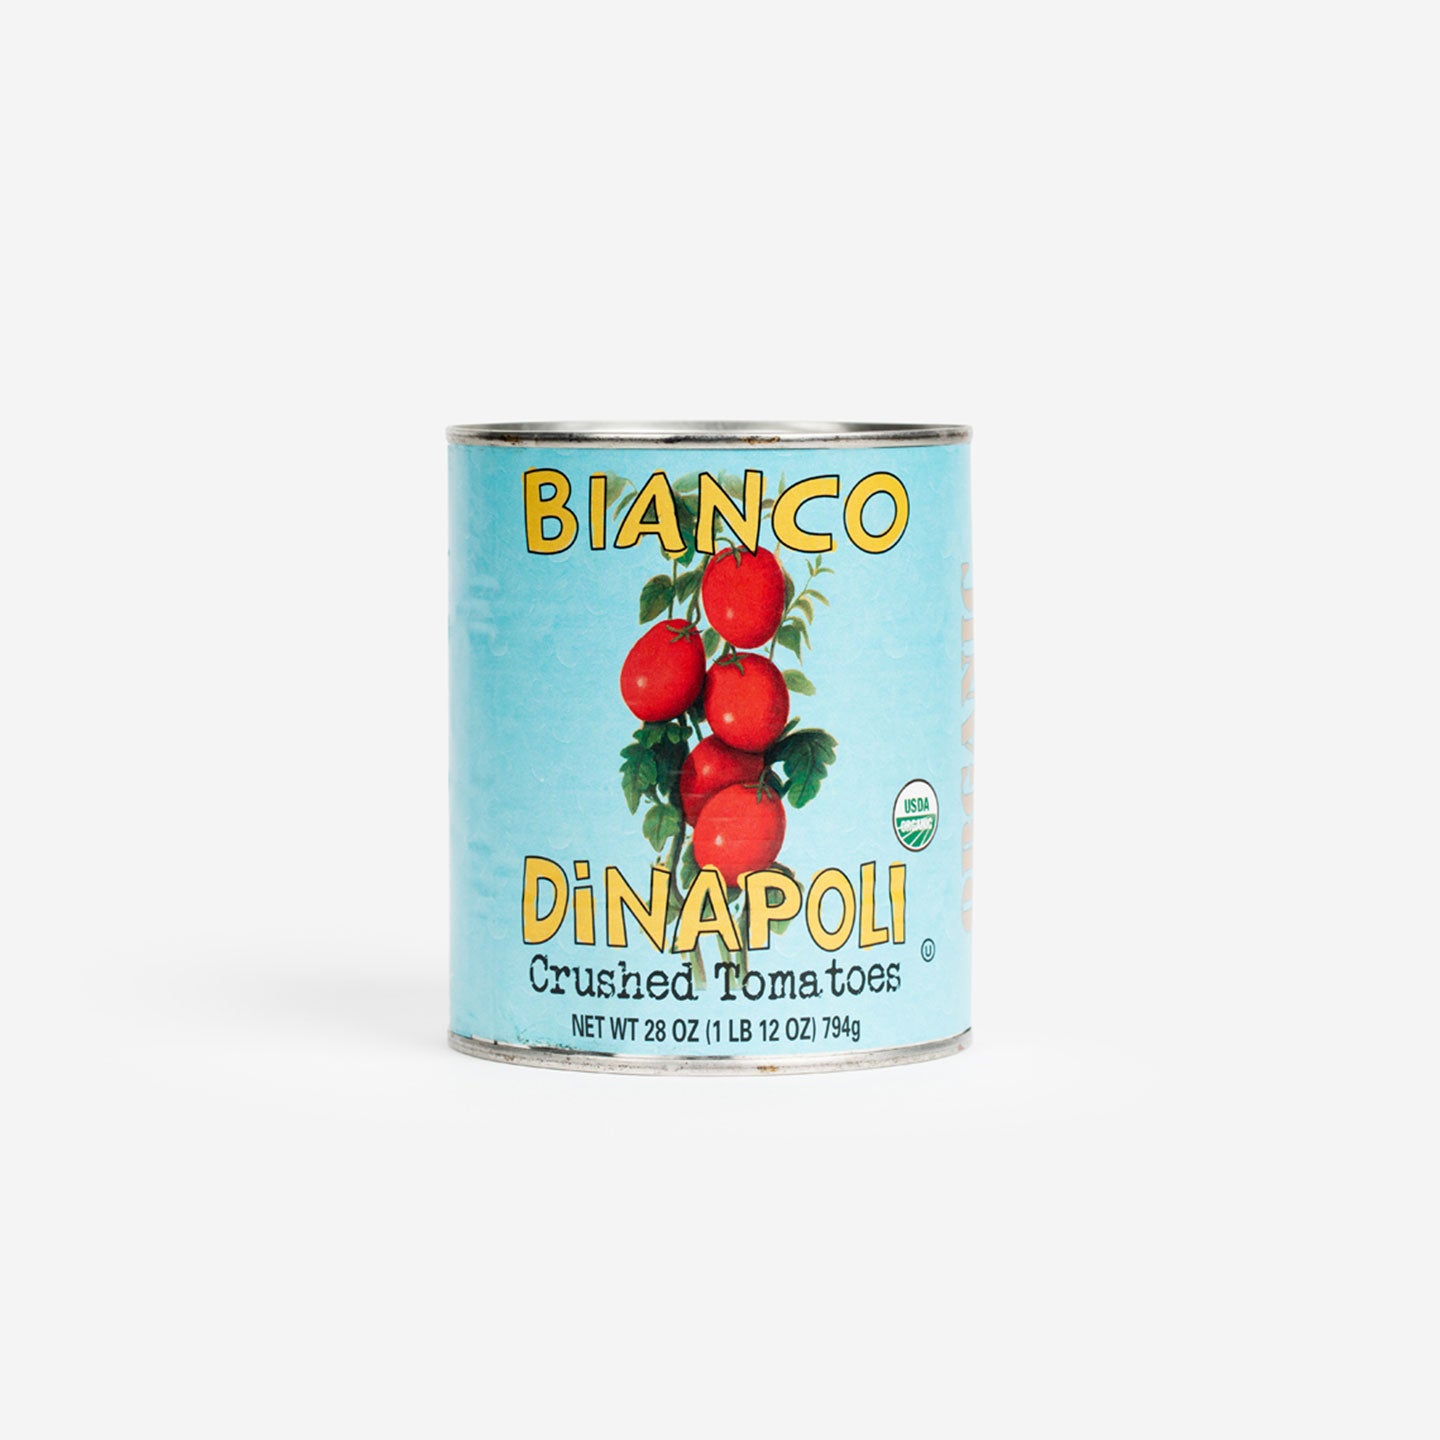 Bianco DiNapoli Tomatoes | Crushed Whole Peeled | Made In Pantry